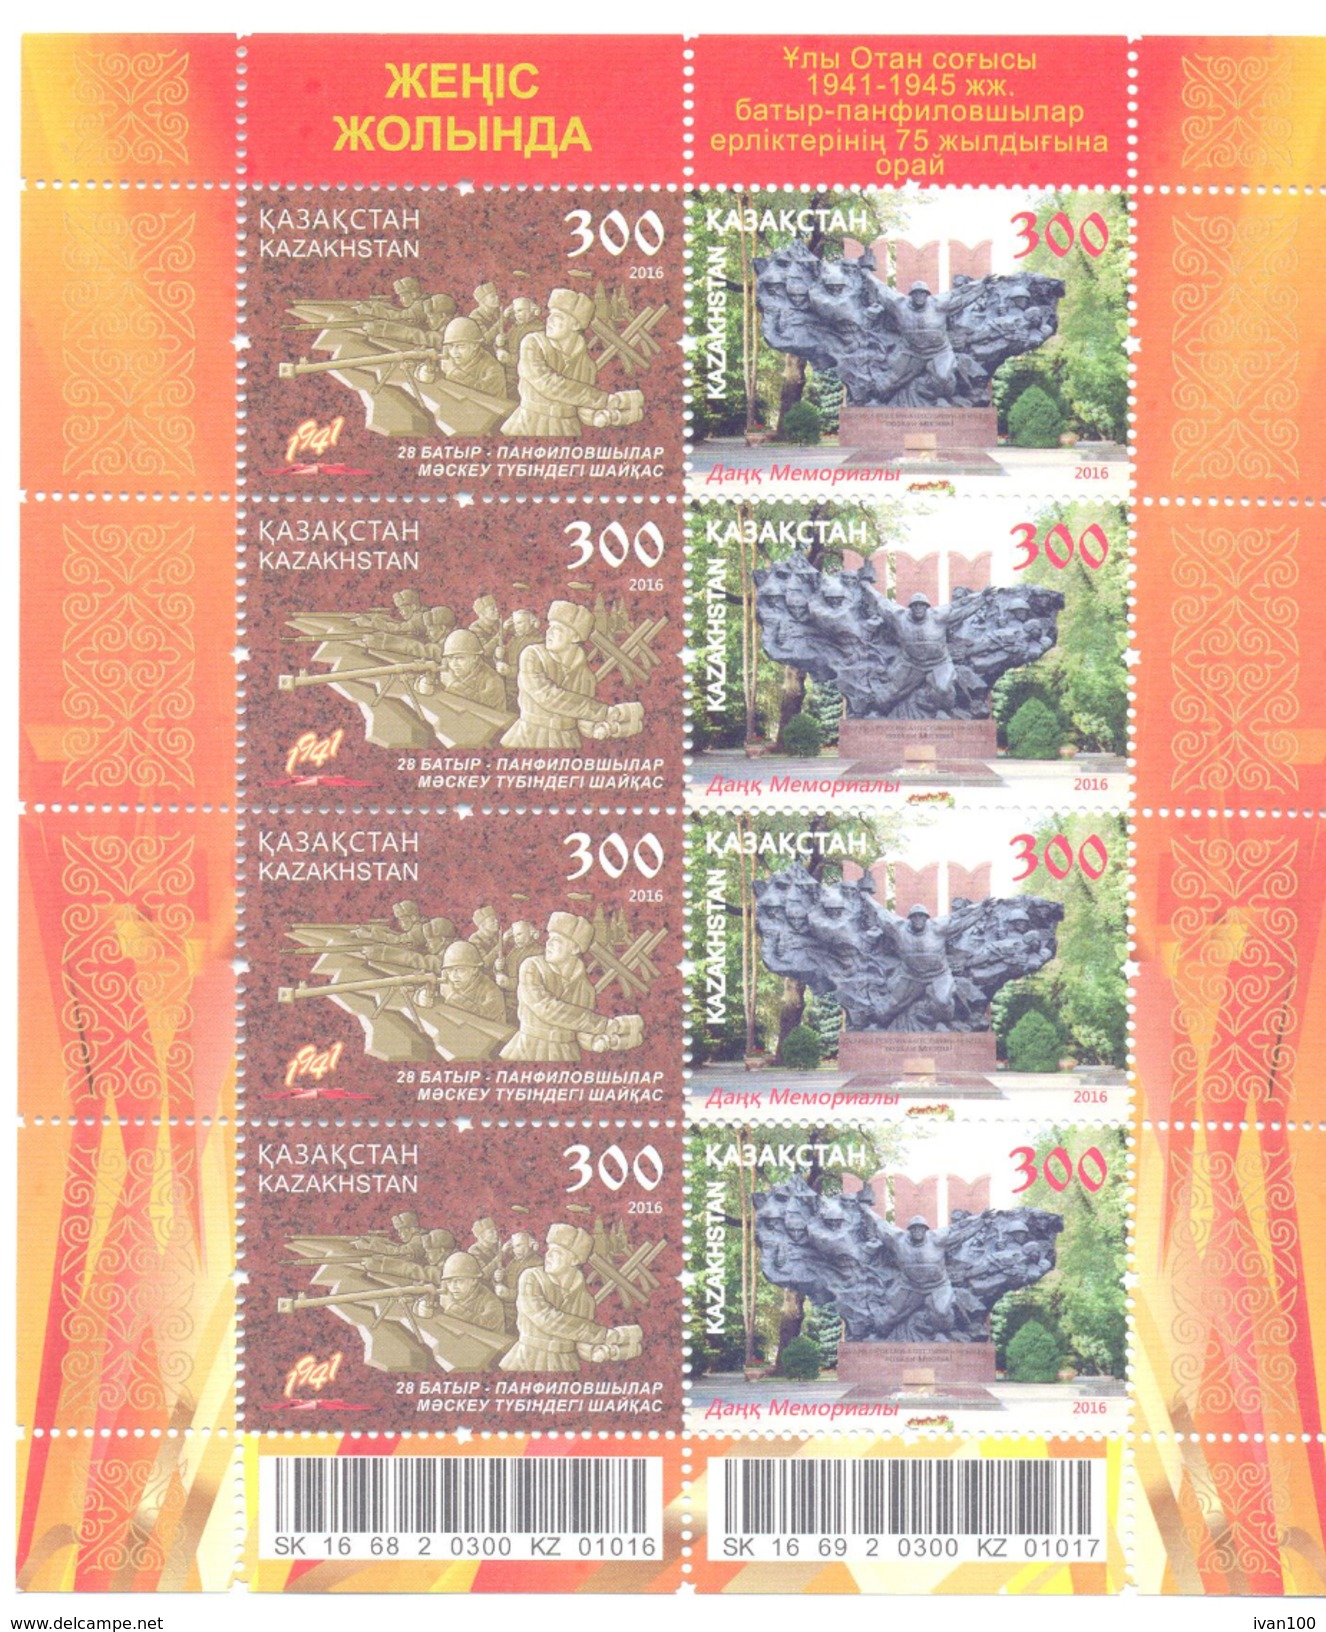 2016. Kazakhstan, 75y Of Feat Panfilov Heroes, Joint Issue With Russia, Sheetlet,  Mint/** - Kazakhstan